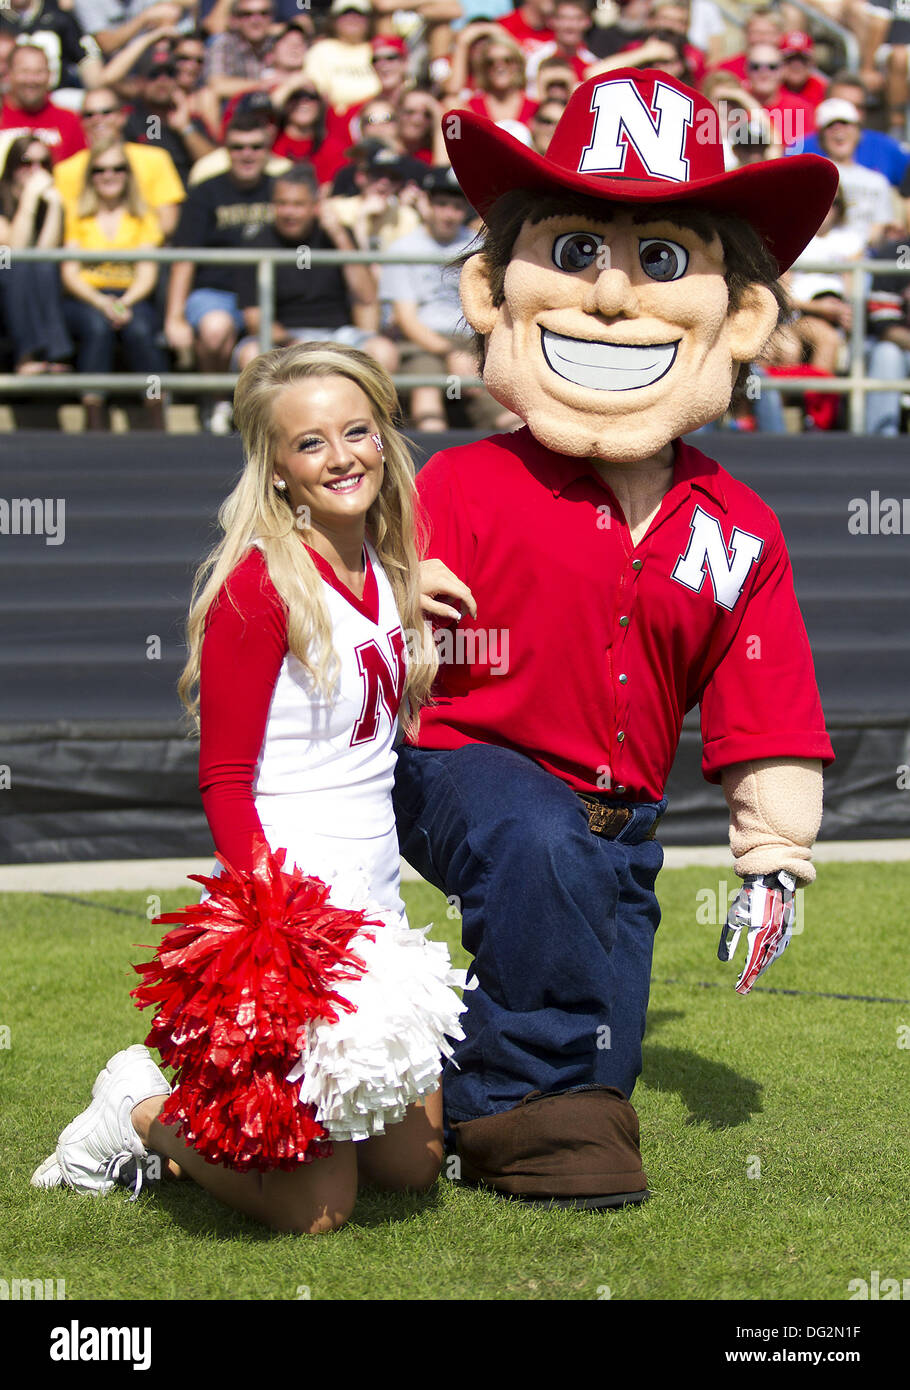 West Lafayette, Indiana, USA. 12th Oct, 2013. October 12, 2013: Nebraska cheerleader and mascot enjoying the game during NCAA Football action between the Nebraska Cornhuskers and the Purdue Boilermakers at Ross-Ade Stadium in West Lafayette, Indiana. Nebraska defeated Purdue 44-7. Credit:  csm/Alamy Live News Stock Photo